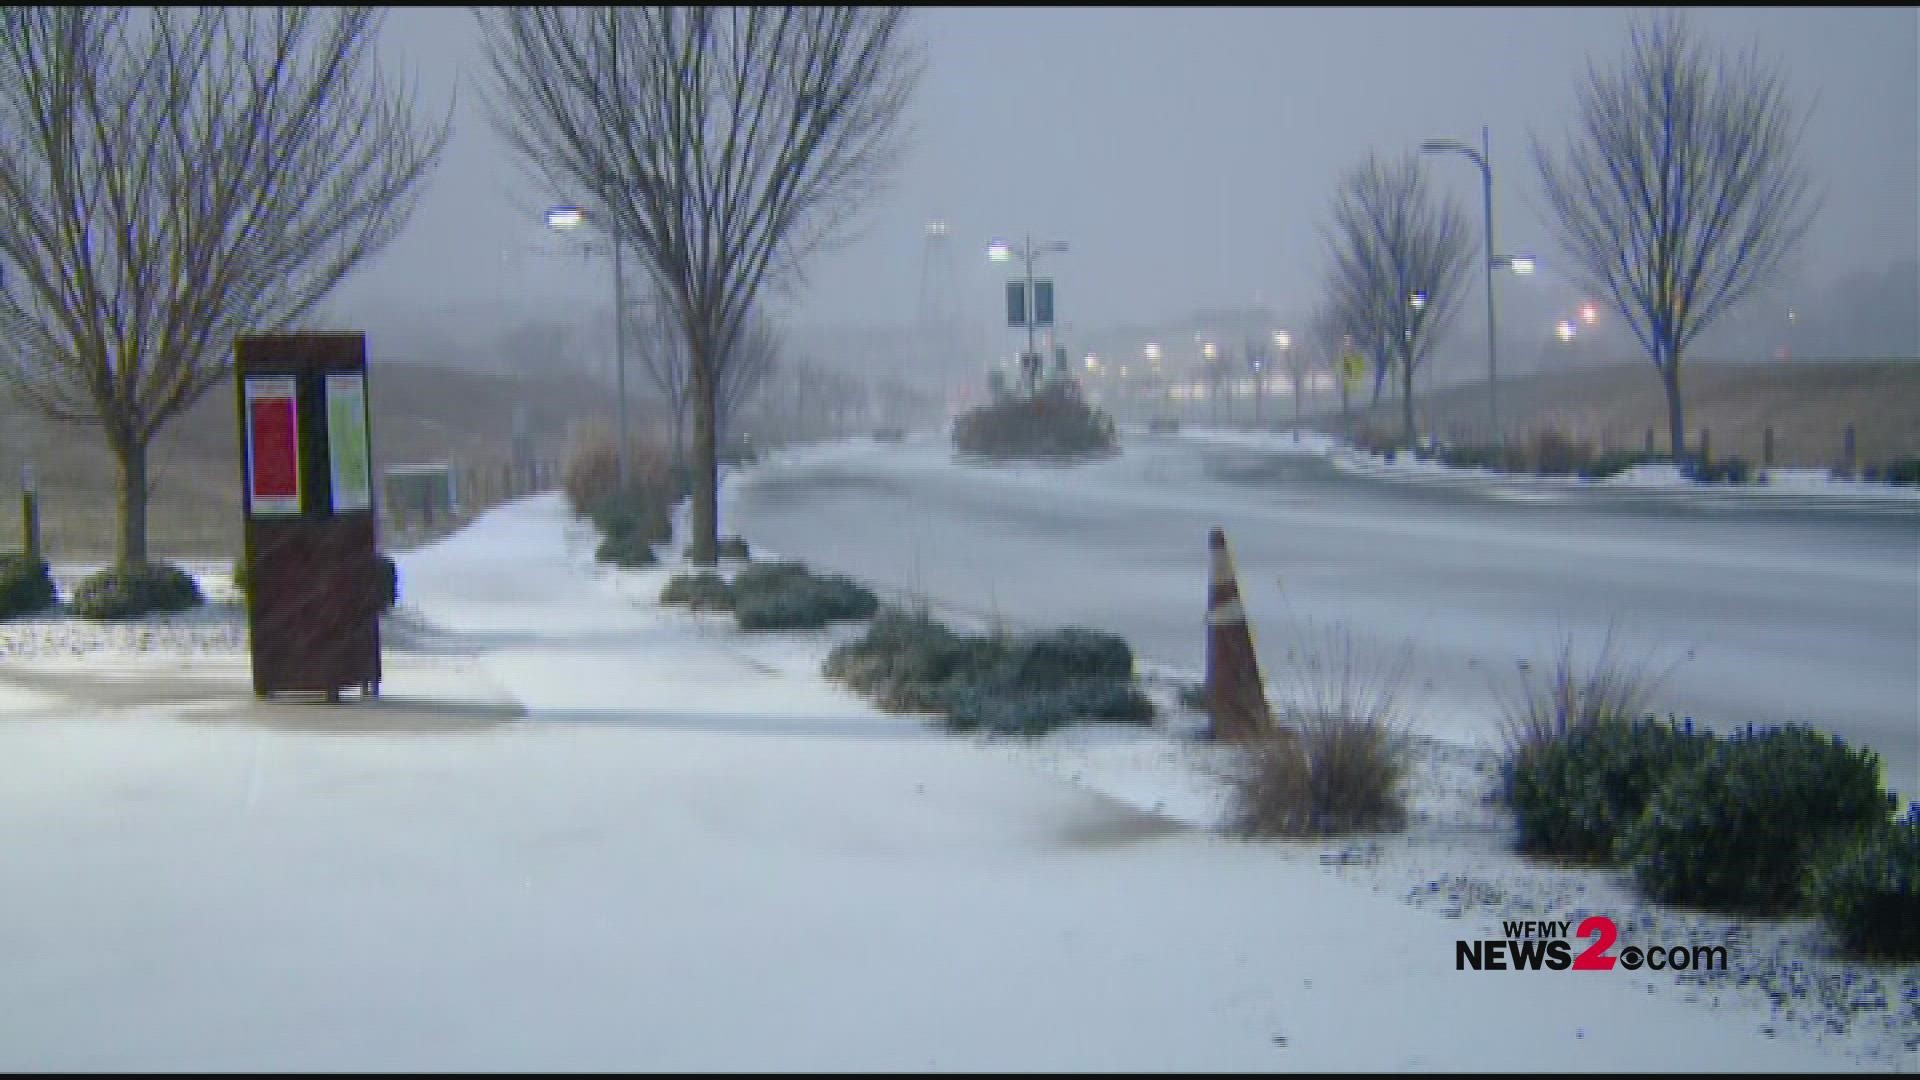 Check out the snowfall early Sunday morning in Winston-Salem!